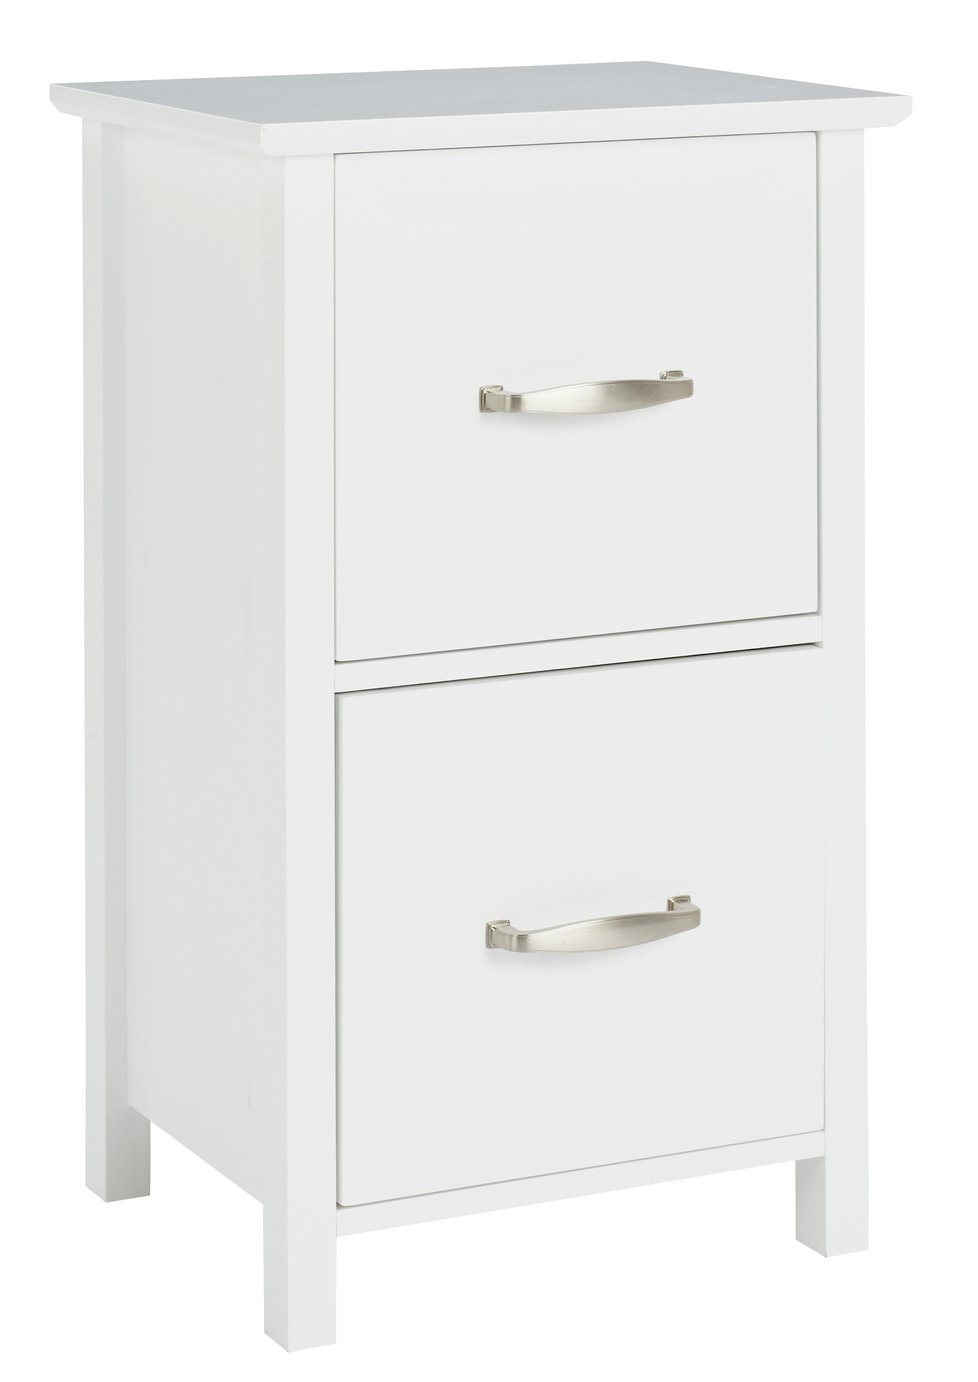 Argos Home Tongue & Groove 2 Drawer Unit - White